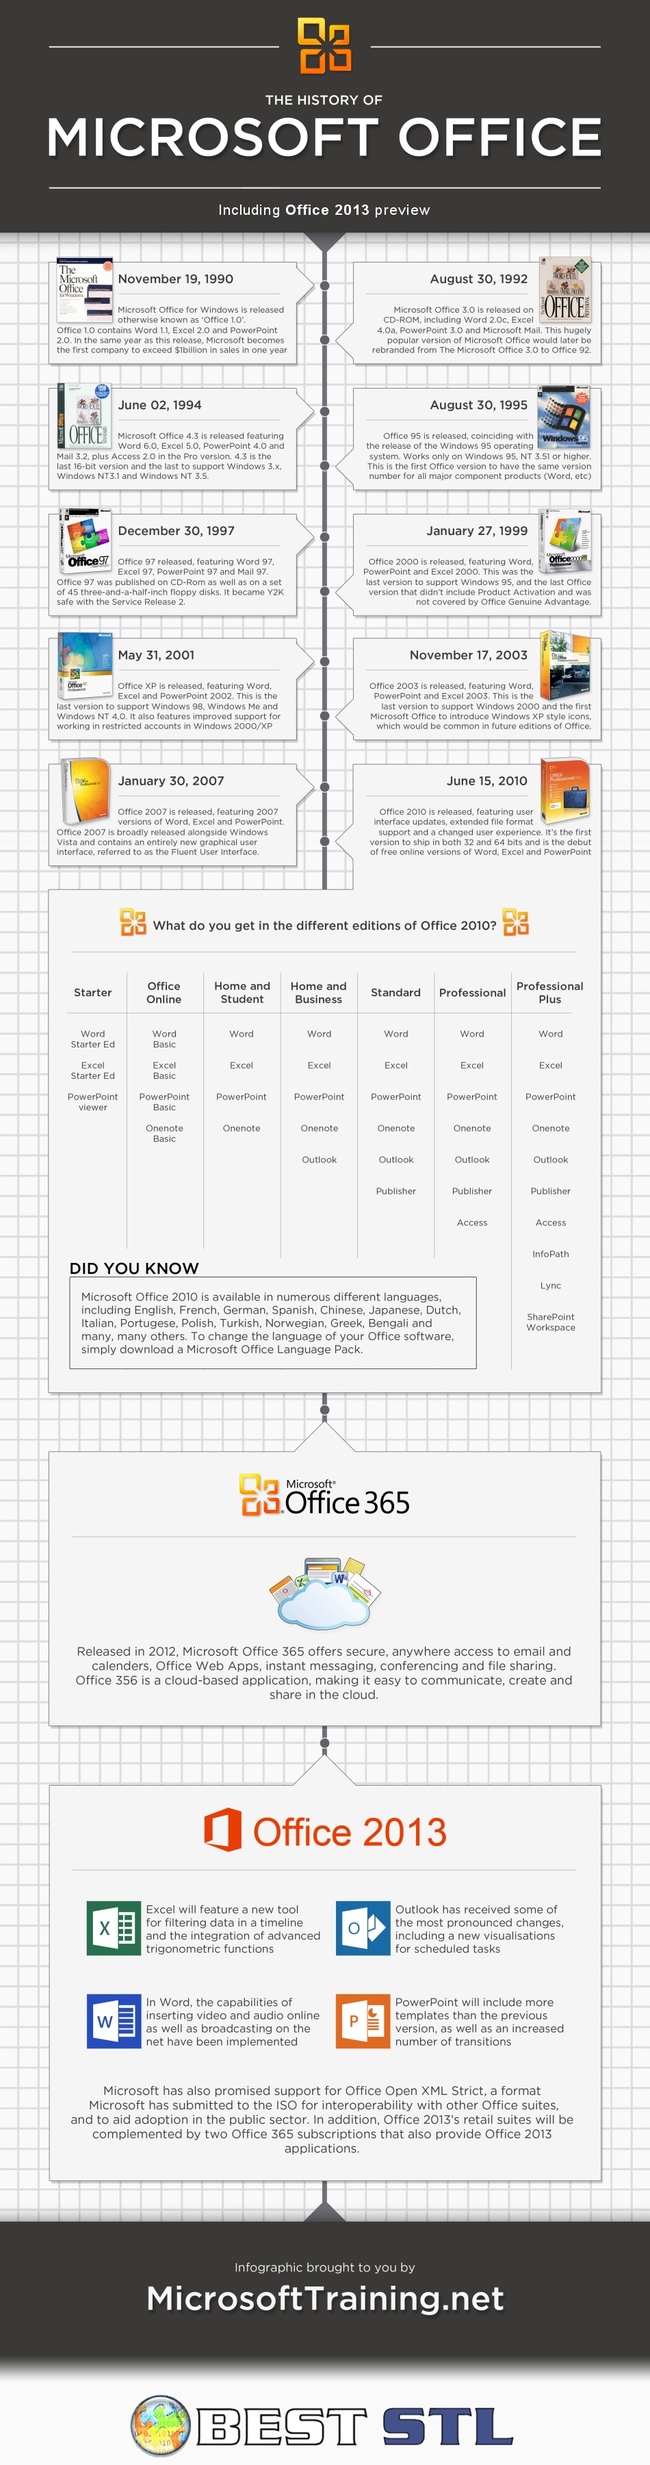 Microsoft Office History-Infographic